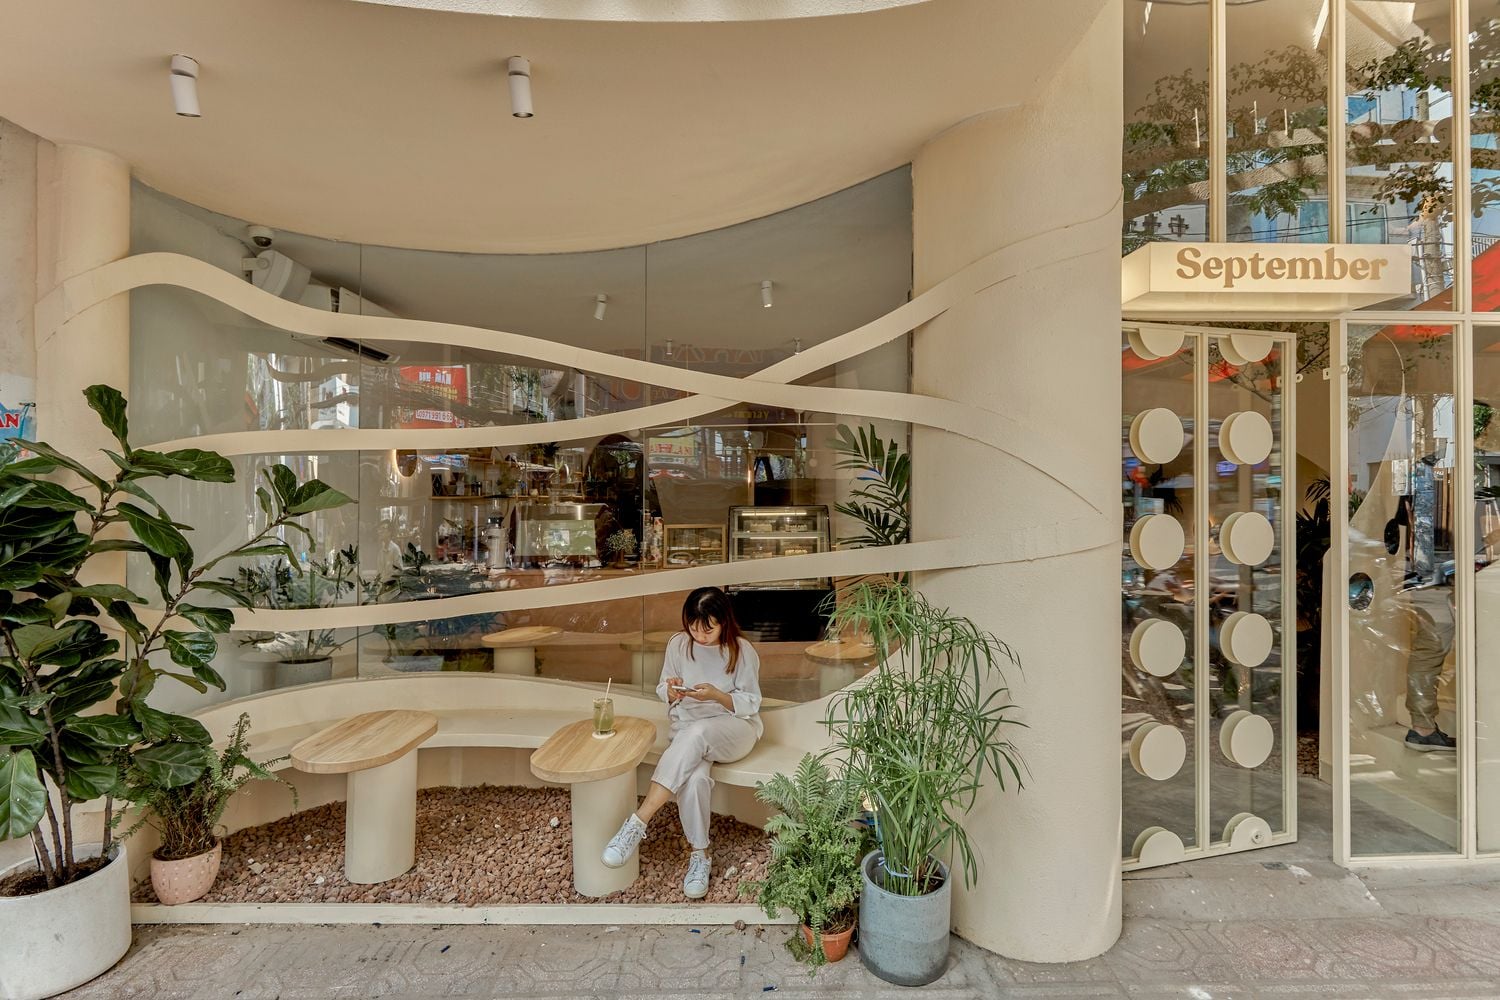 The main entrance to the Red5studio-designed café encompasses the same organic feel as the rest of the space.